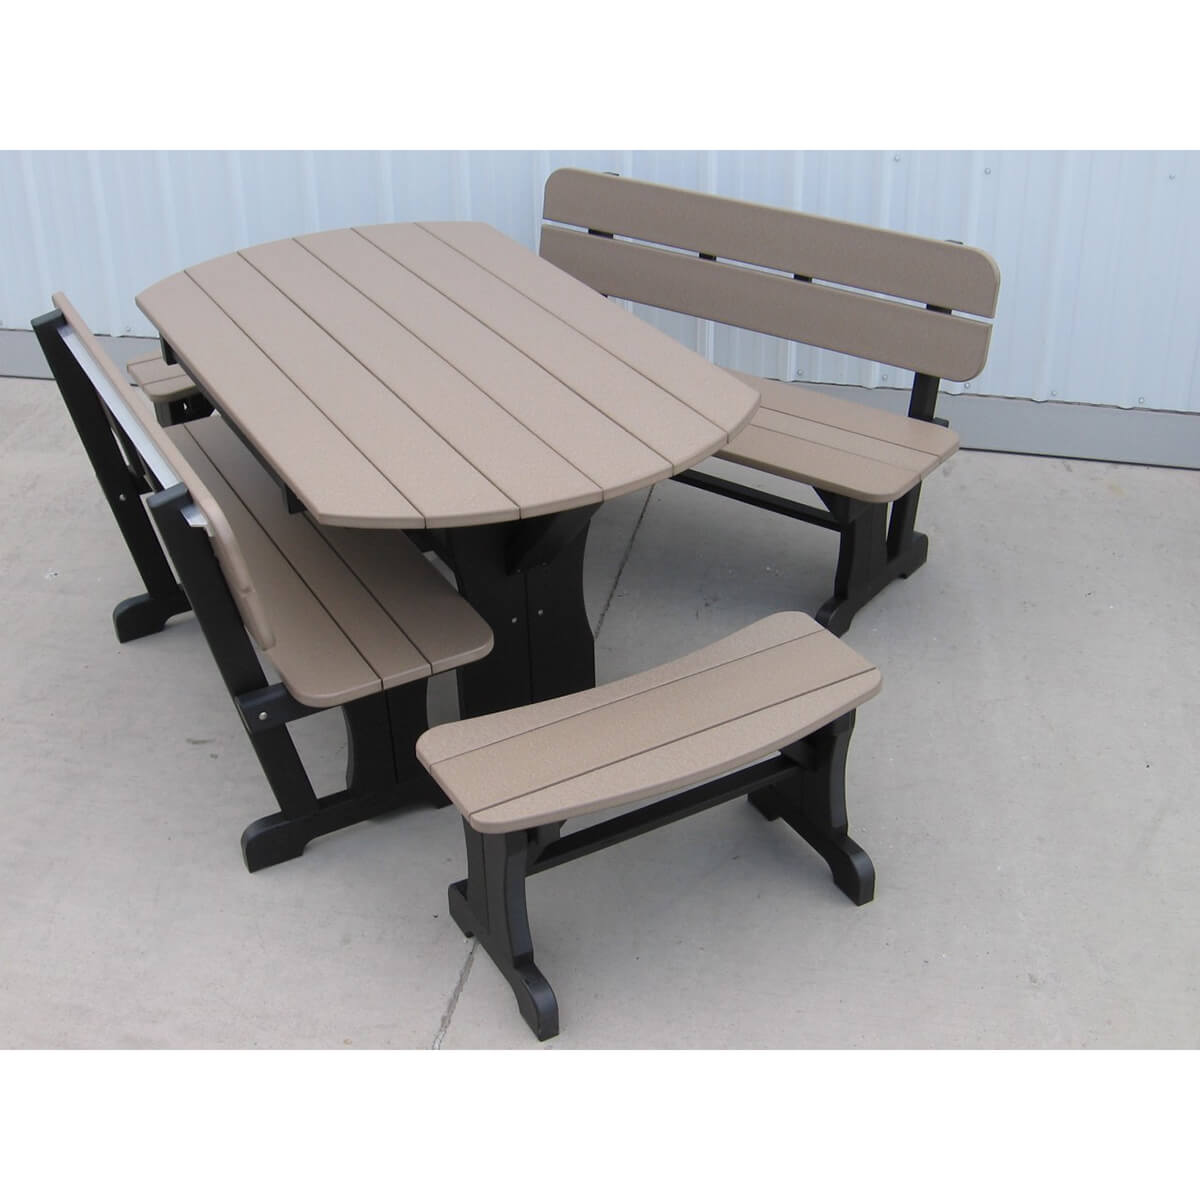 5FootOvalTablewithBenches89574